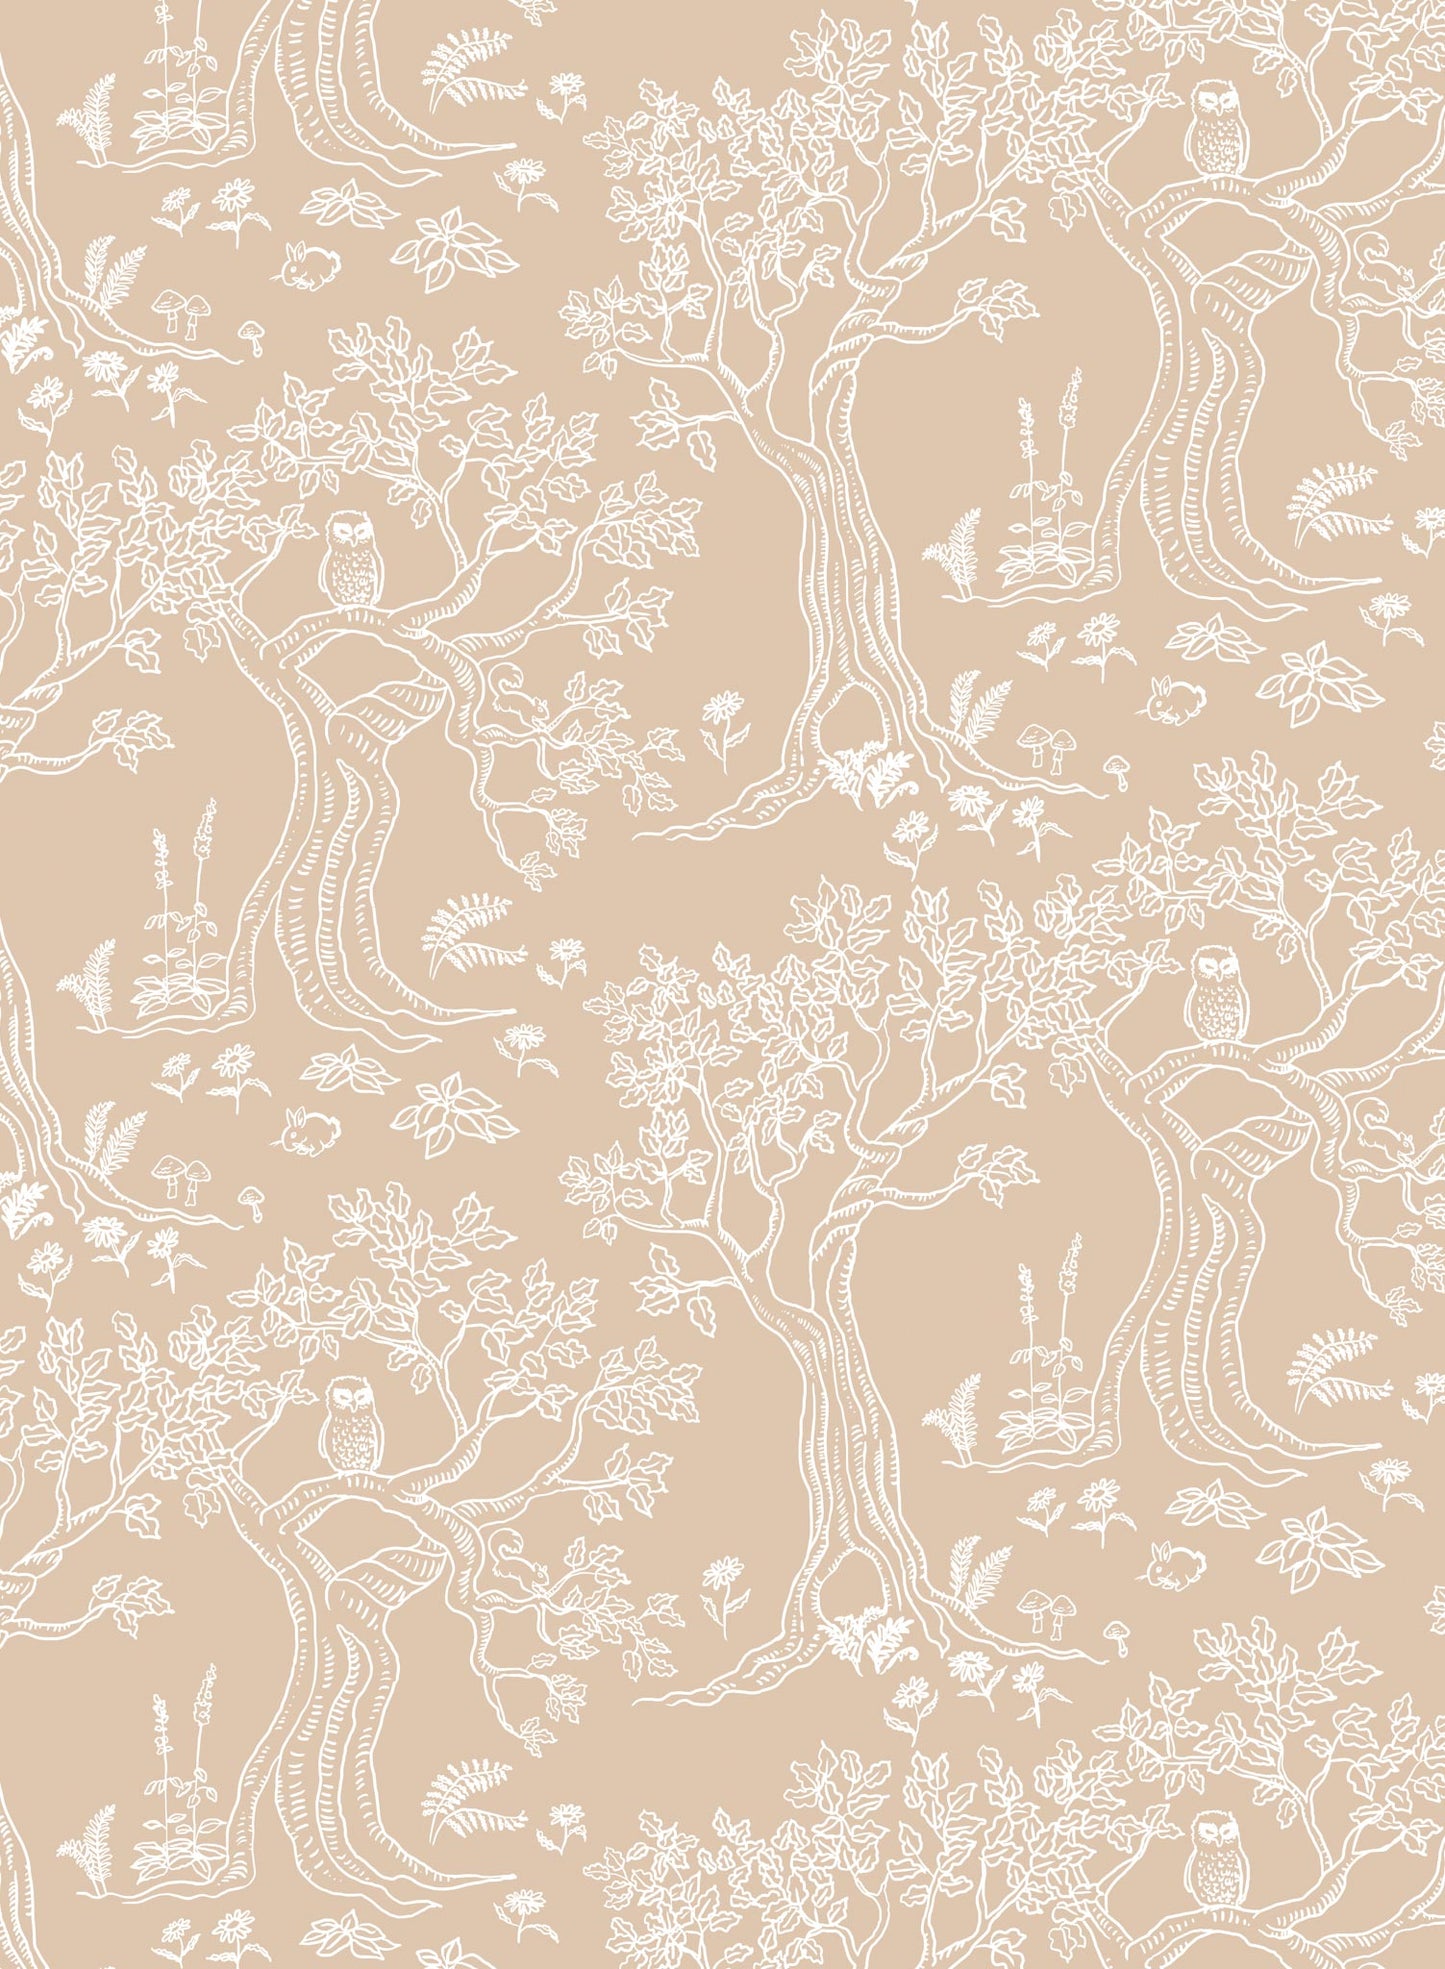 Enchanted is a minimalist wallpaper by Opposite Wall of a enchanted trees